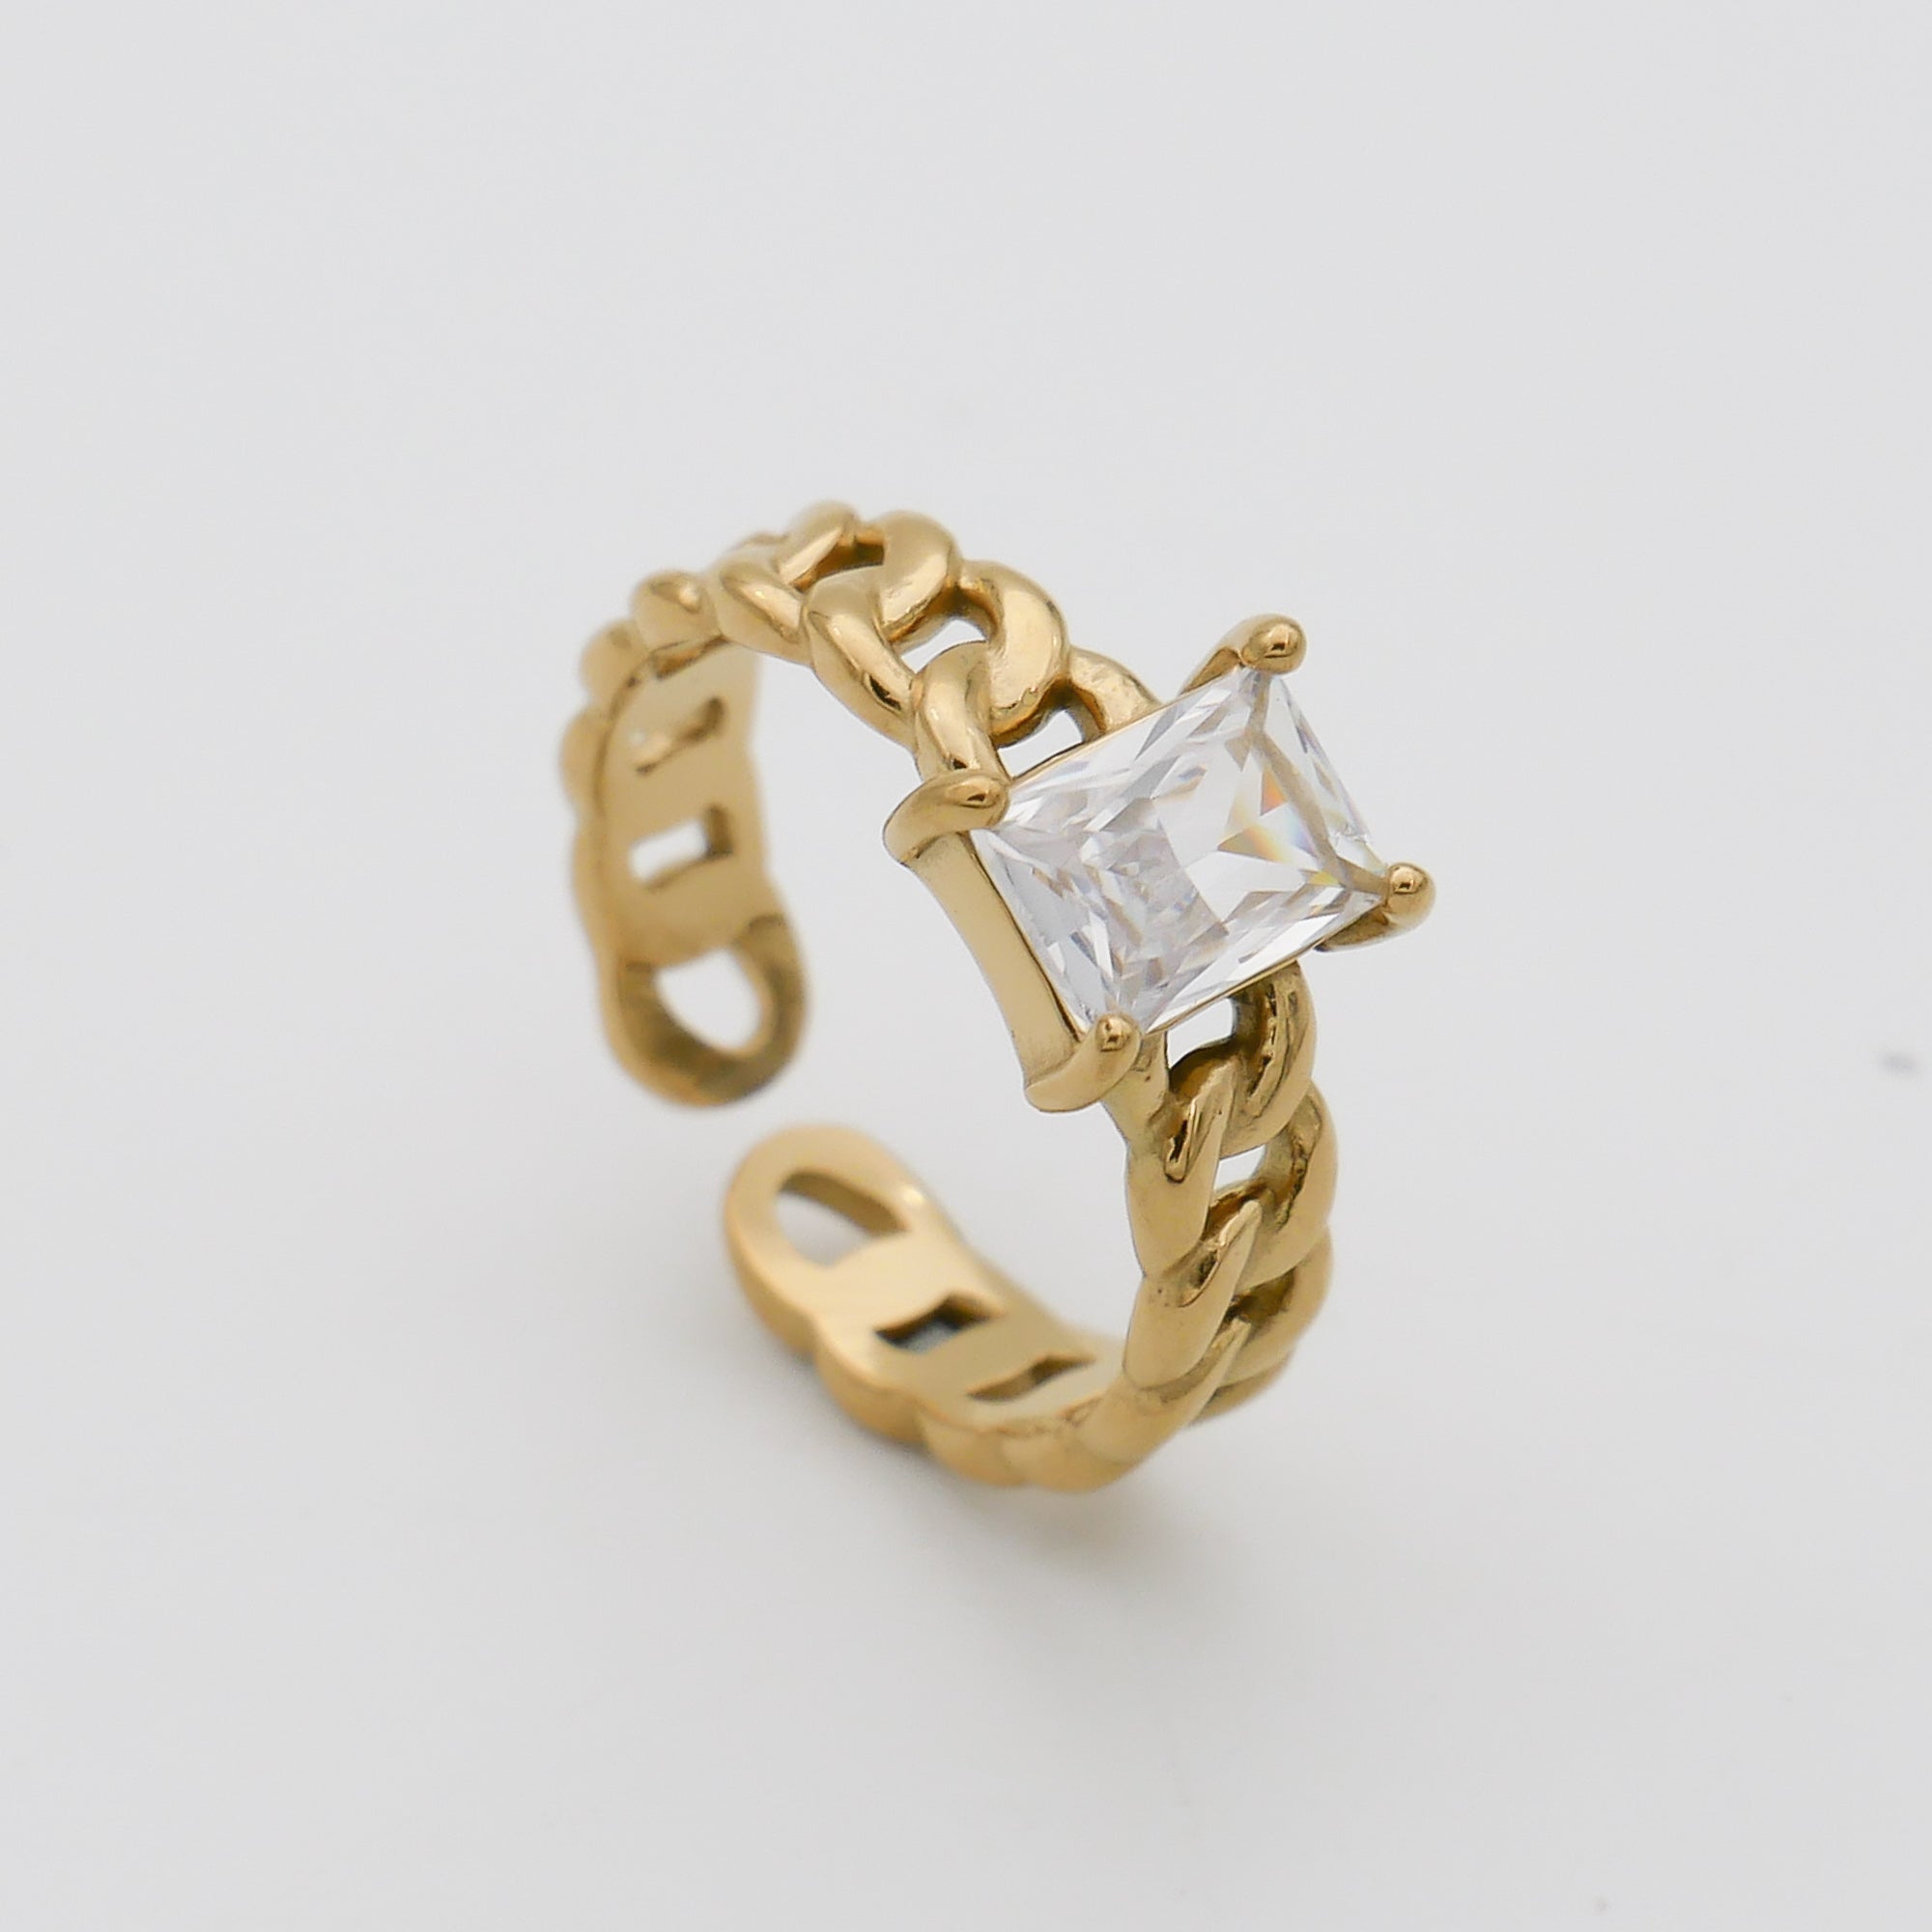 Laria Cuban Ring with clear cz gems